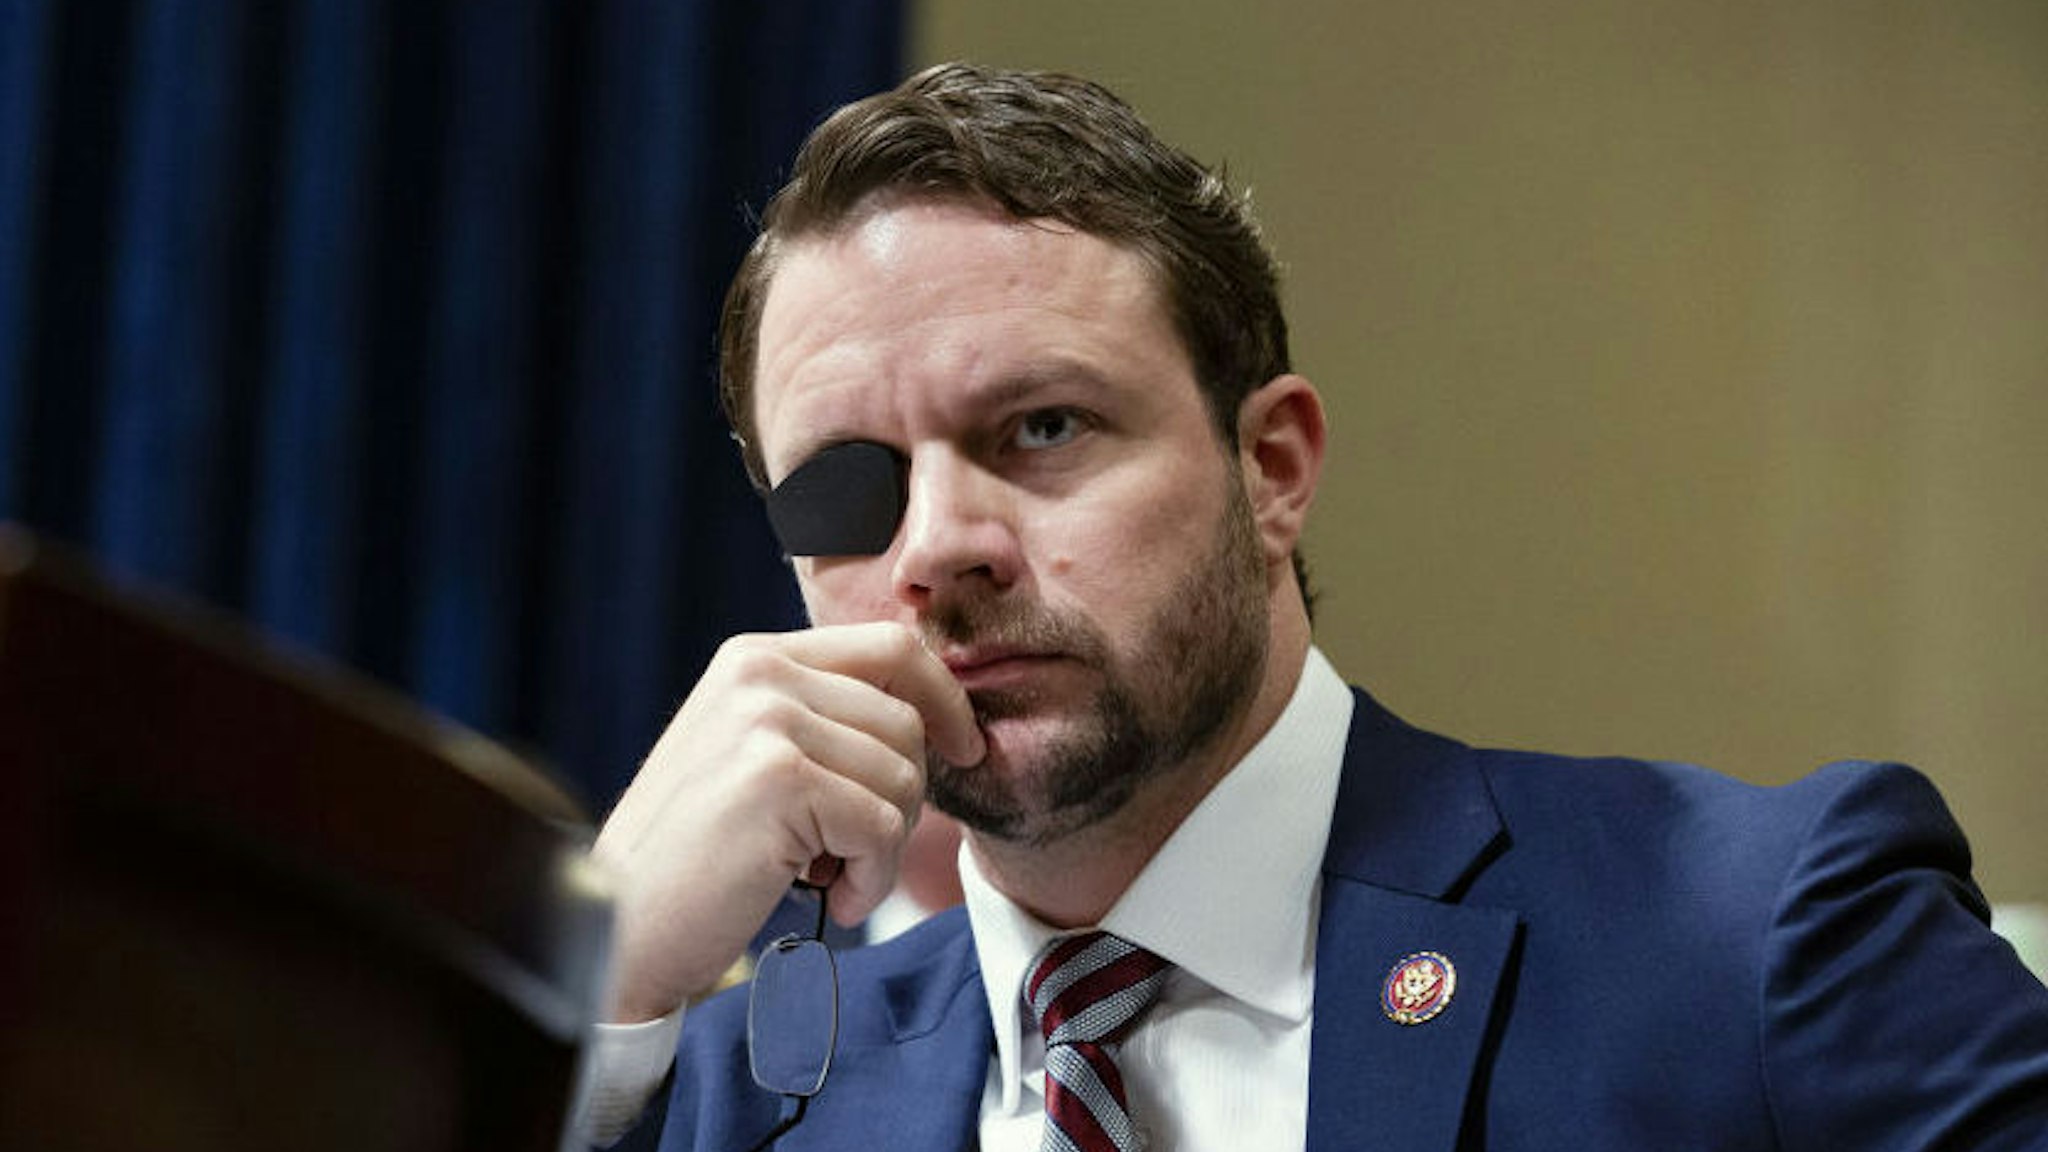 Representative Dan Crenshaw, a Republican from Texas, listens during a House Homeland Security Committee hearing in Washington, D.C., U.S., on Wednesday, June 26, 2019. Google's global director of information policy testified Wednesday that no single employee could skew search results based on her political beliefs. Photographer: Anna Moneymaker/Bloomberg